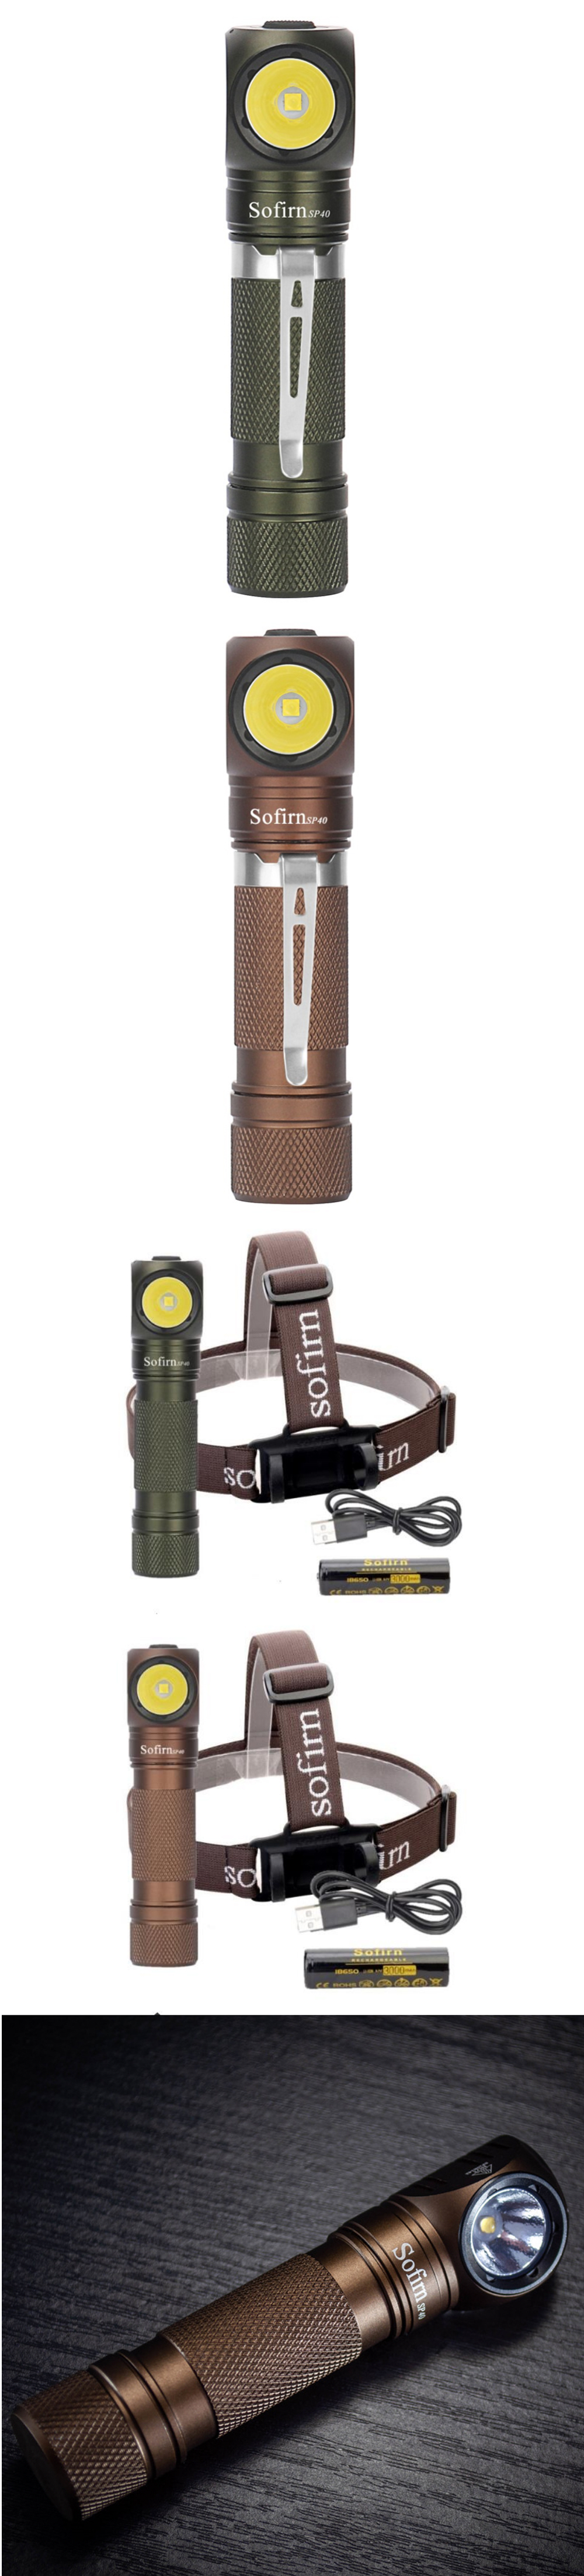 Sofirn-SP40-XPL-1200LM-USB-Rechargeable-LED-Headlamp-L-shape-1835018650-Flashlight-with-Magnet-Tail--1709383